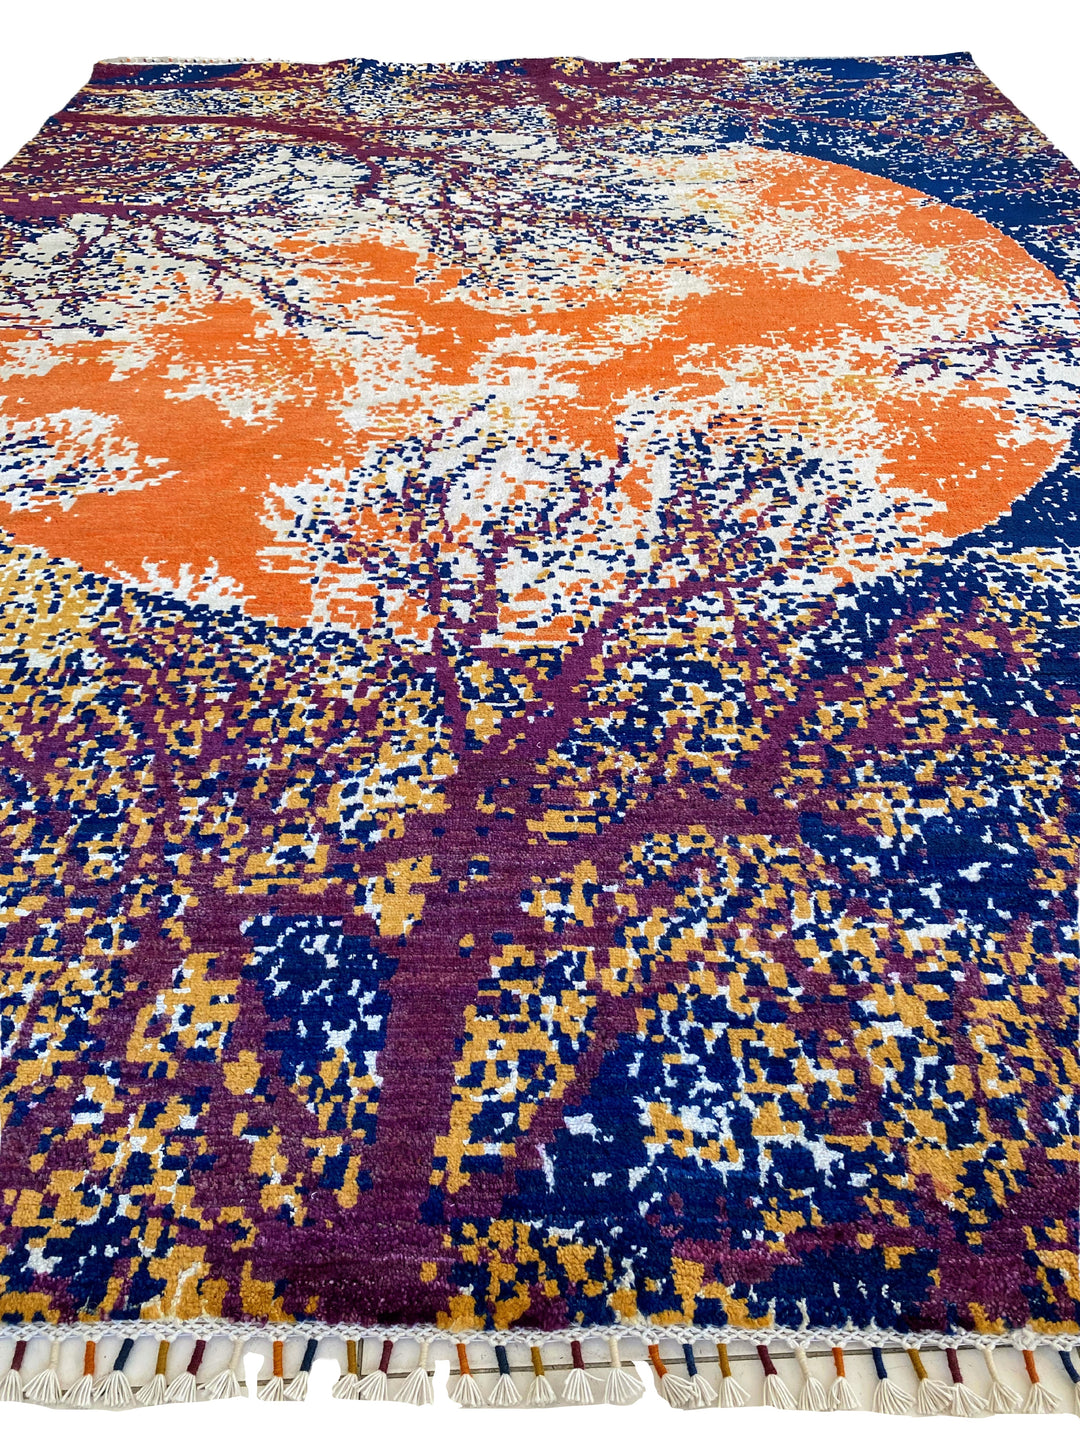 MoonTree Abstract Rug - Size: 10.7 x 8 - Imam Carpet Co